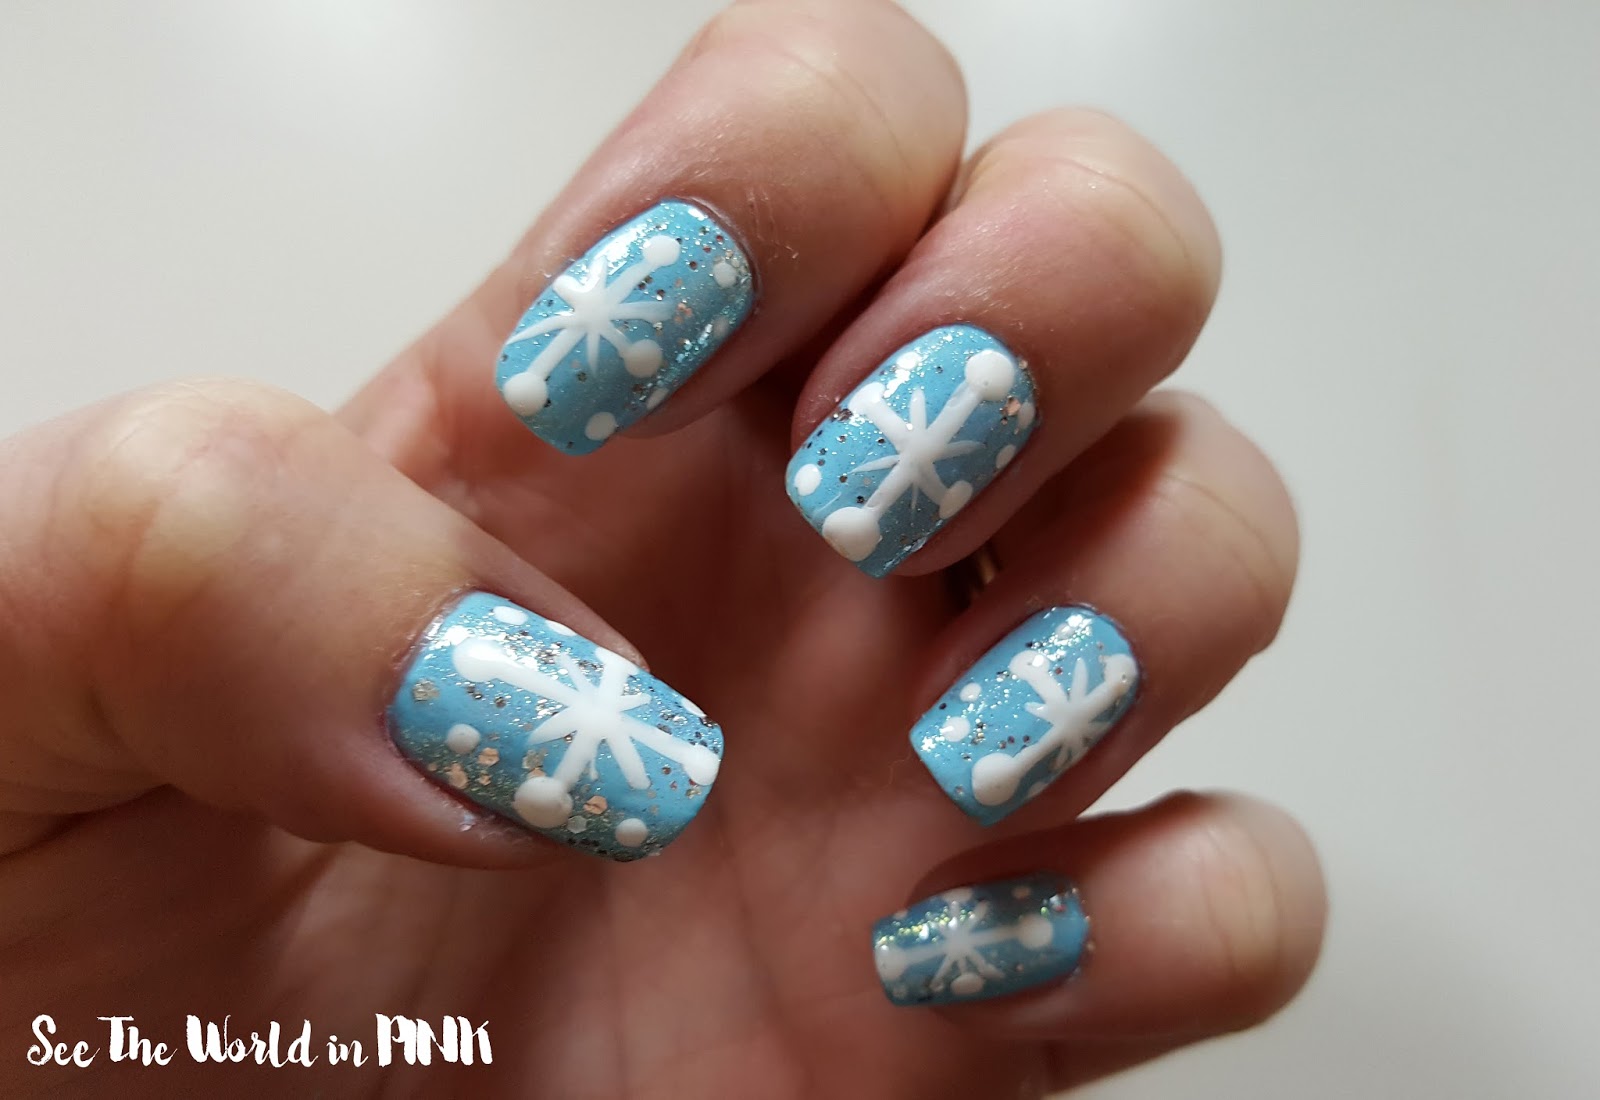 Manicure Monday - Blue, White and Silver Snowflakes! 